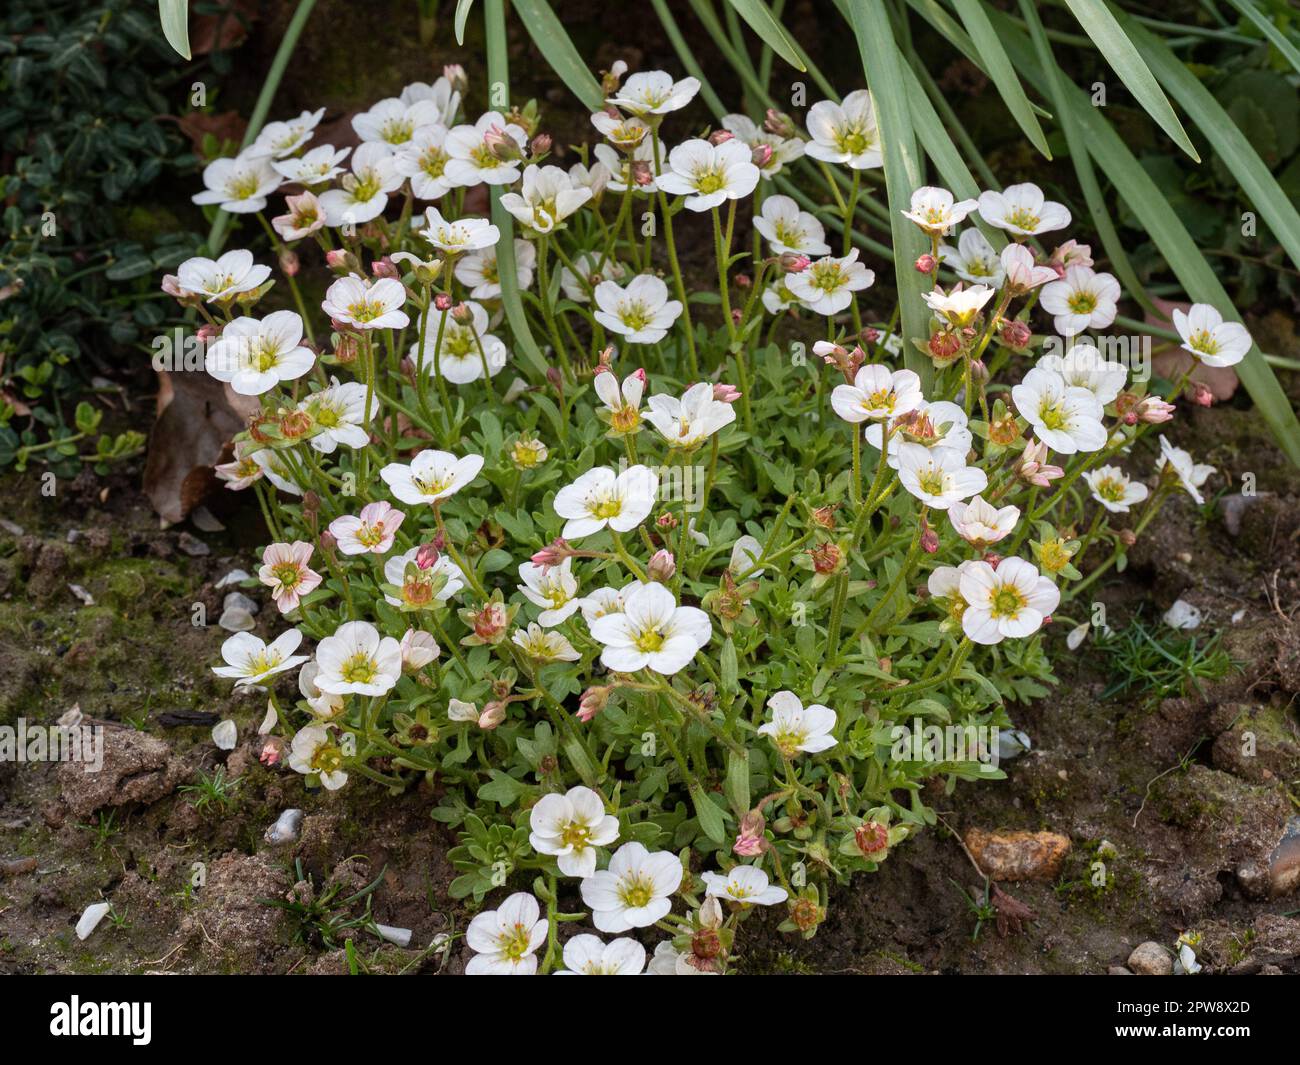 The white flowers and light green mossy foliage of Saxifraga arendsii 'Alpino Early White' Stock Photo